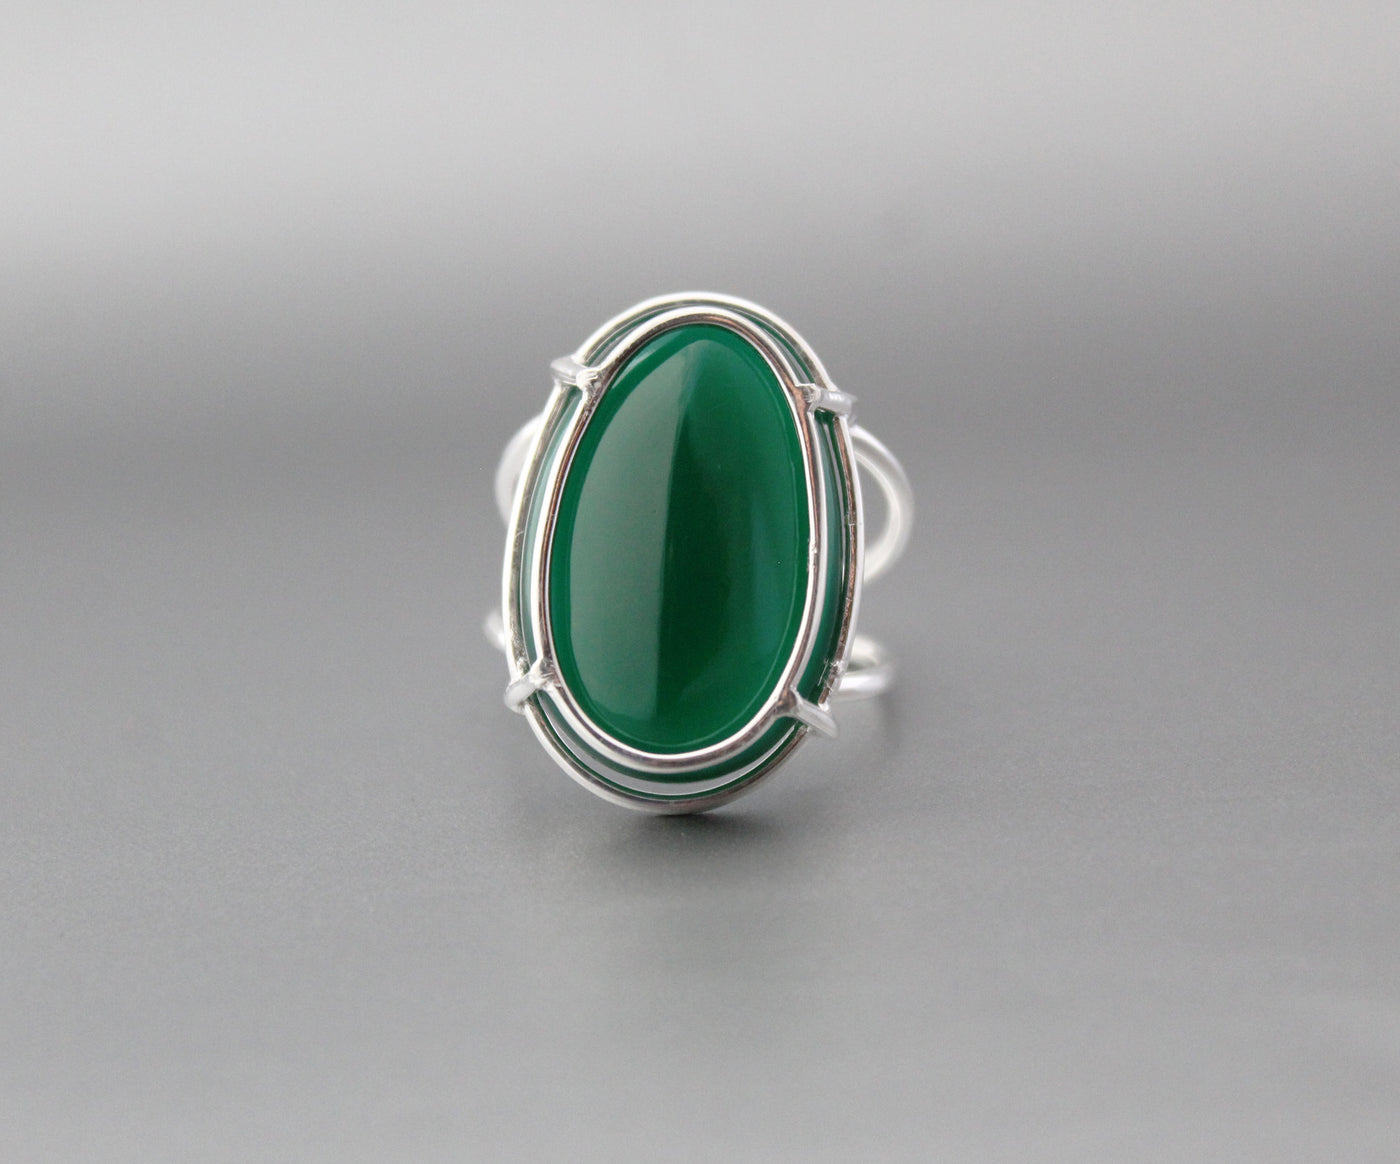 Natural Green Onyx Ring, Handmade 925 Silver Ring, Green Onyx Designer Ring, December Birthstone, Promise Ring, Hand Crafted Bohemian Ring